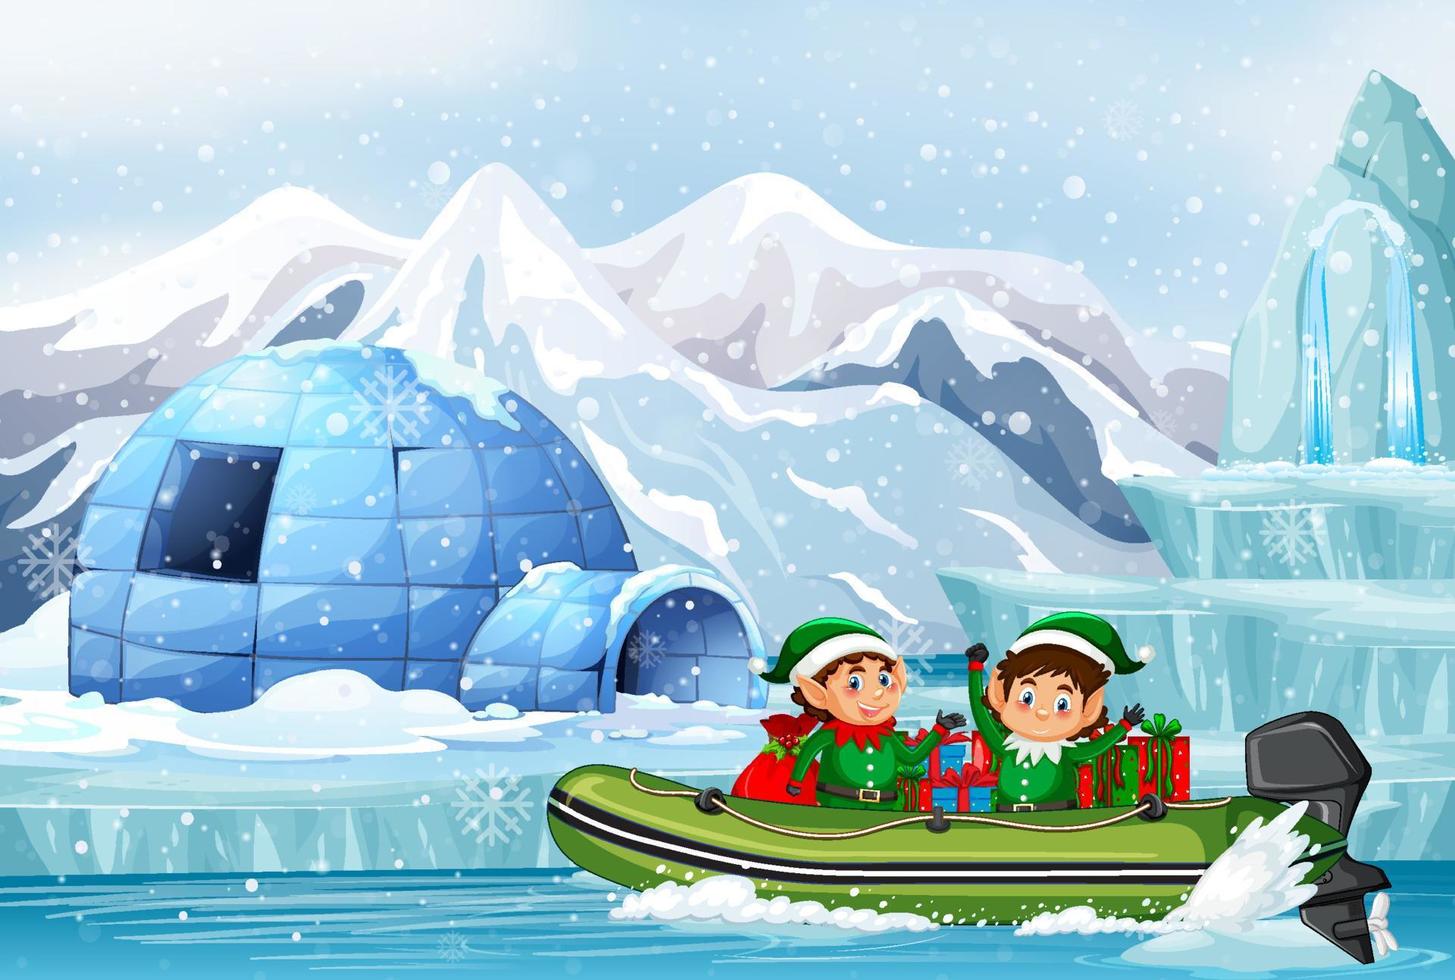 Snowy day with cute elves delivering gifts by boat vector